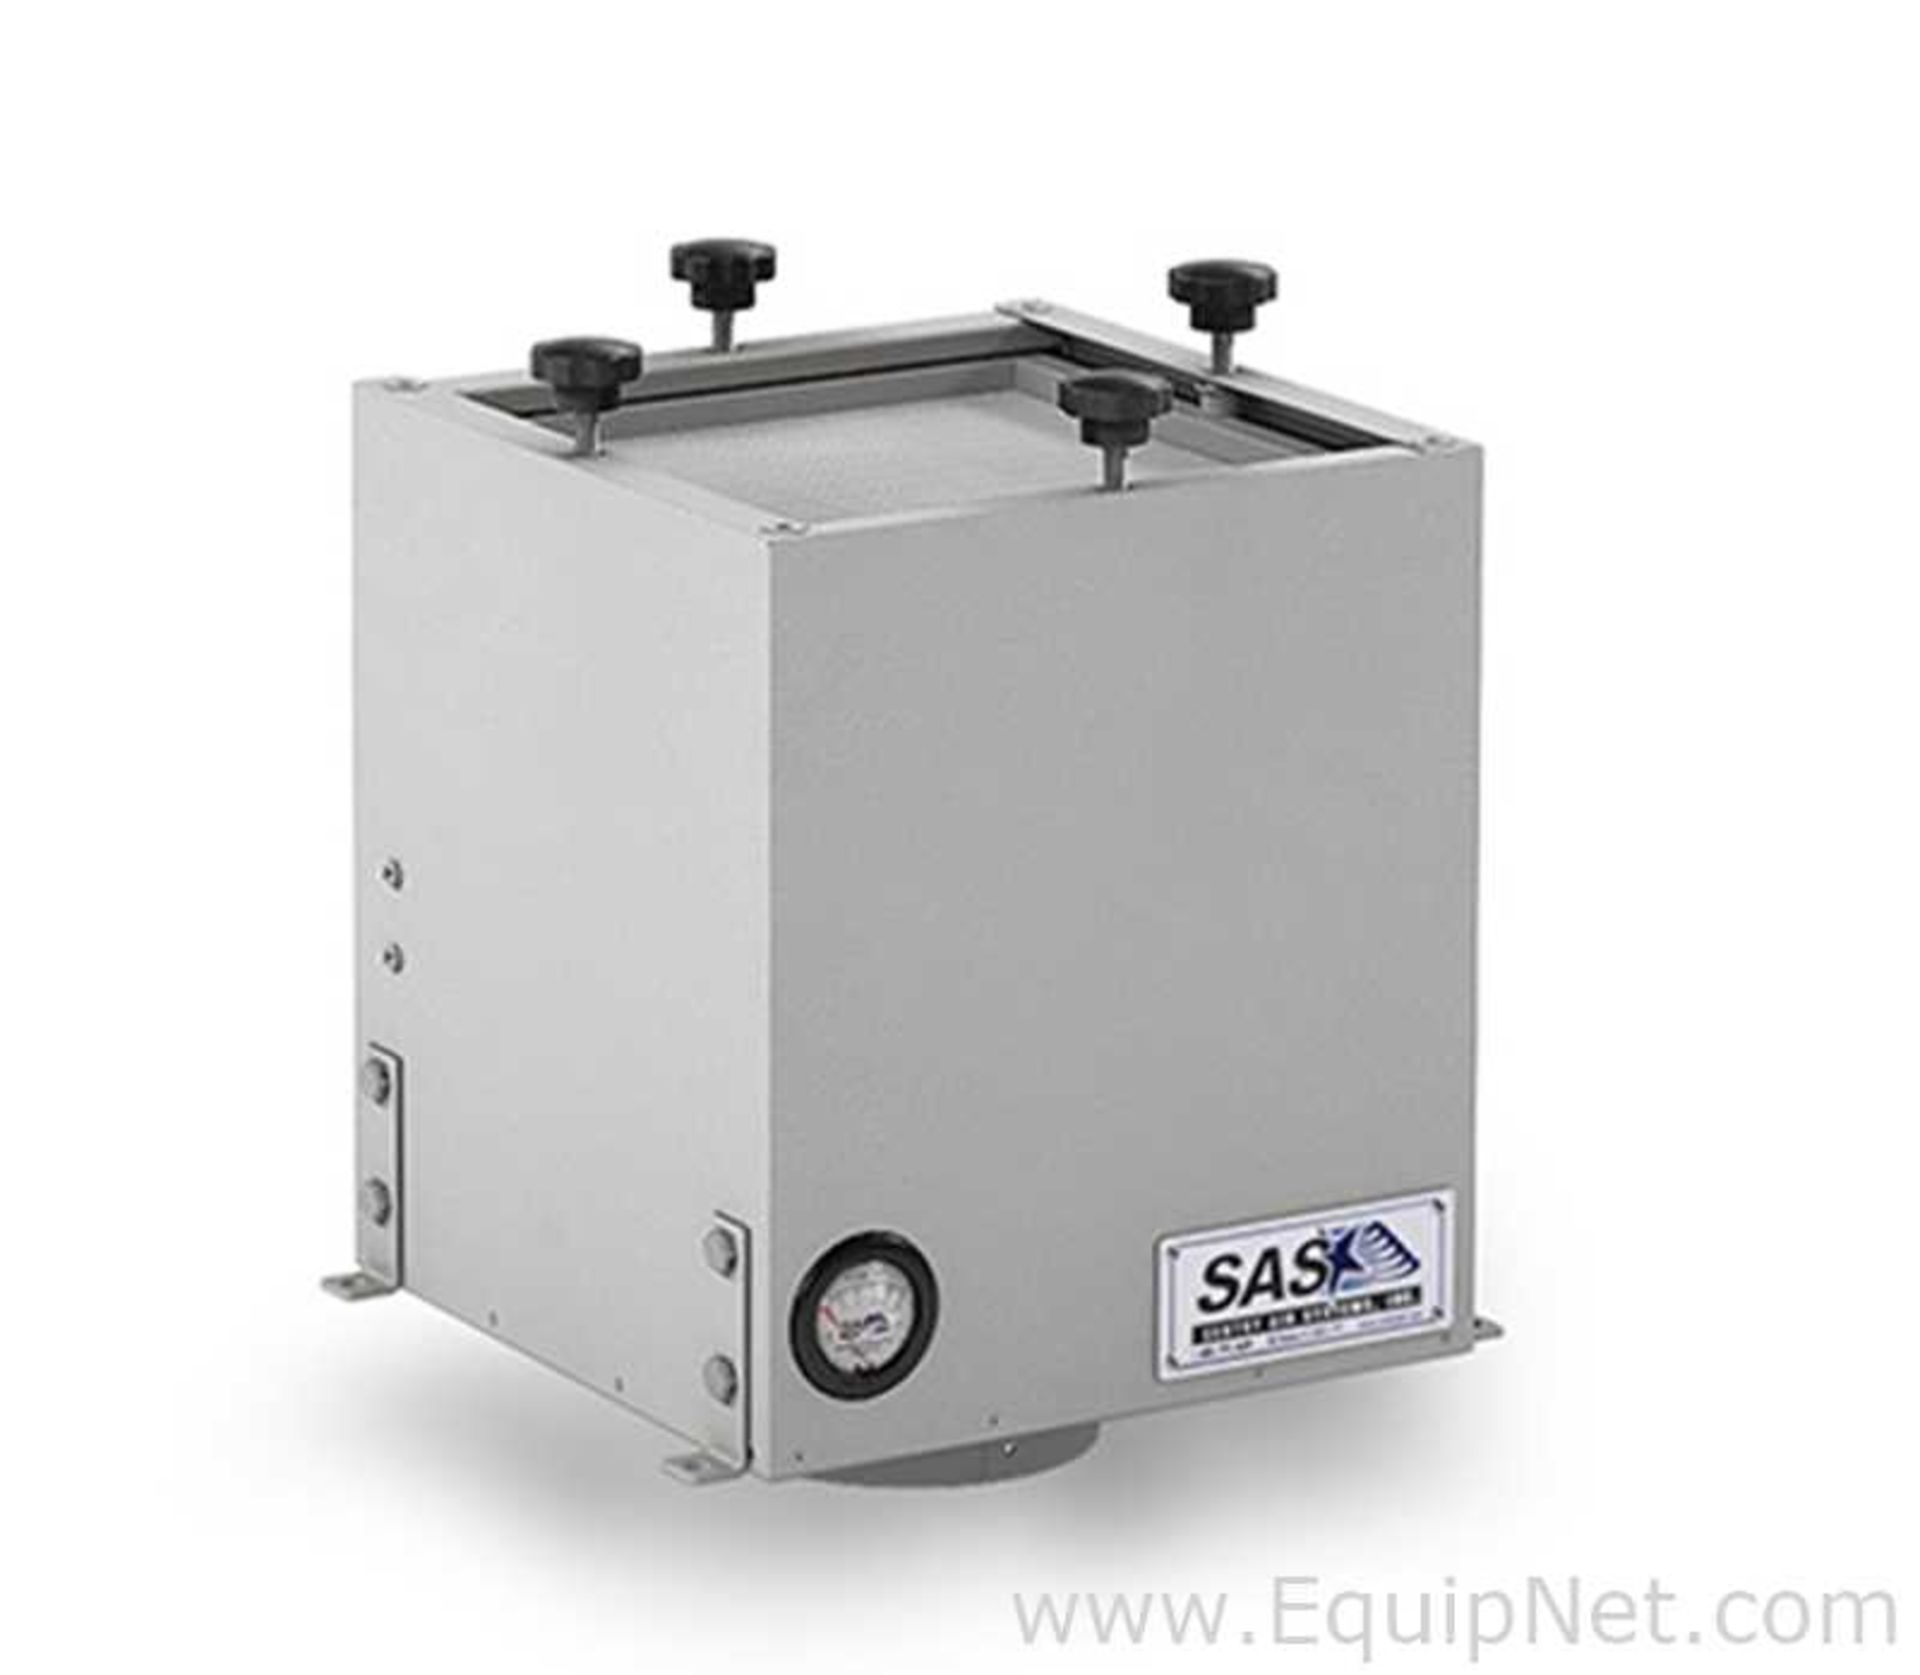 Sentry Air Systems SS-300-ULPA Air Quality System - Image 4 of 4